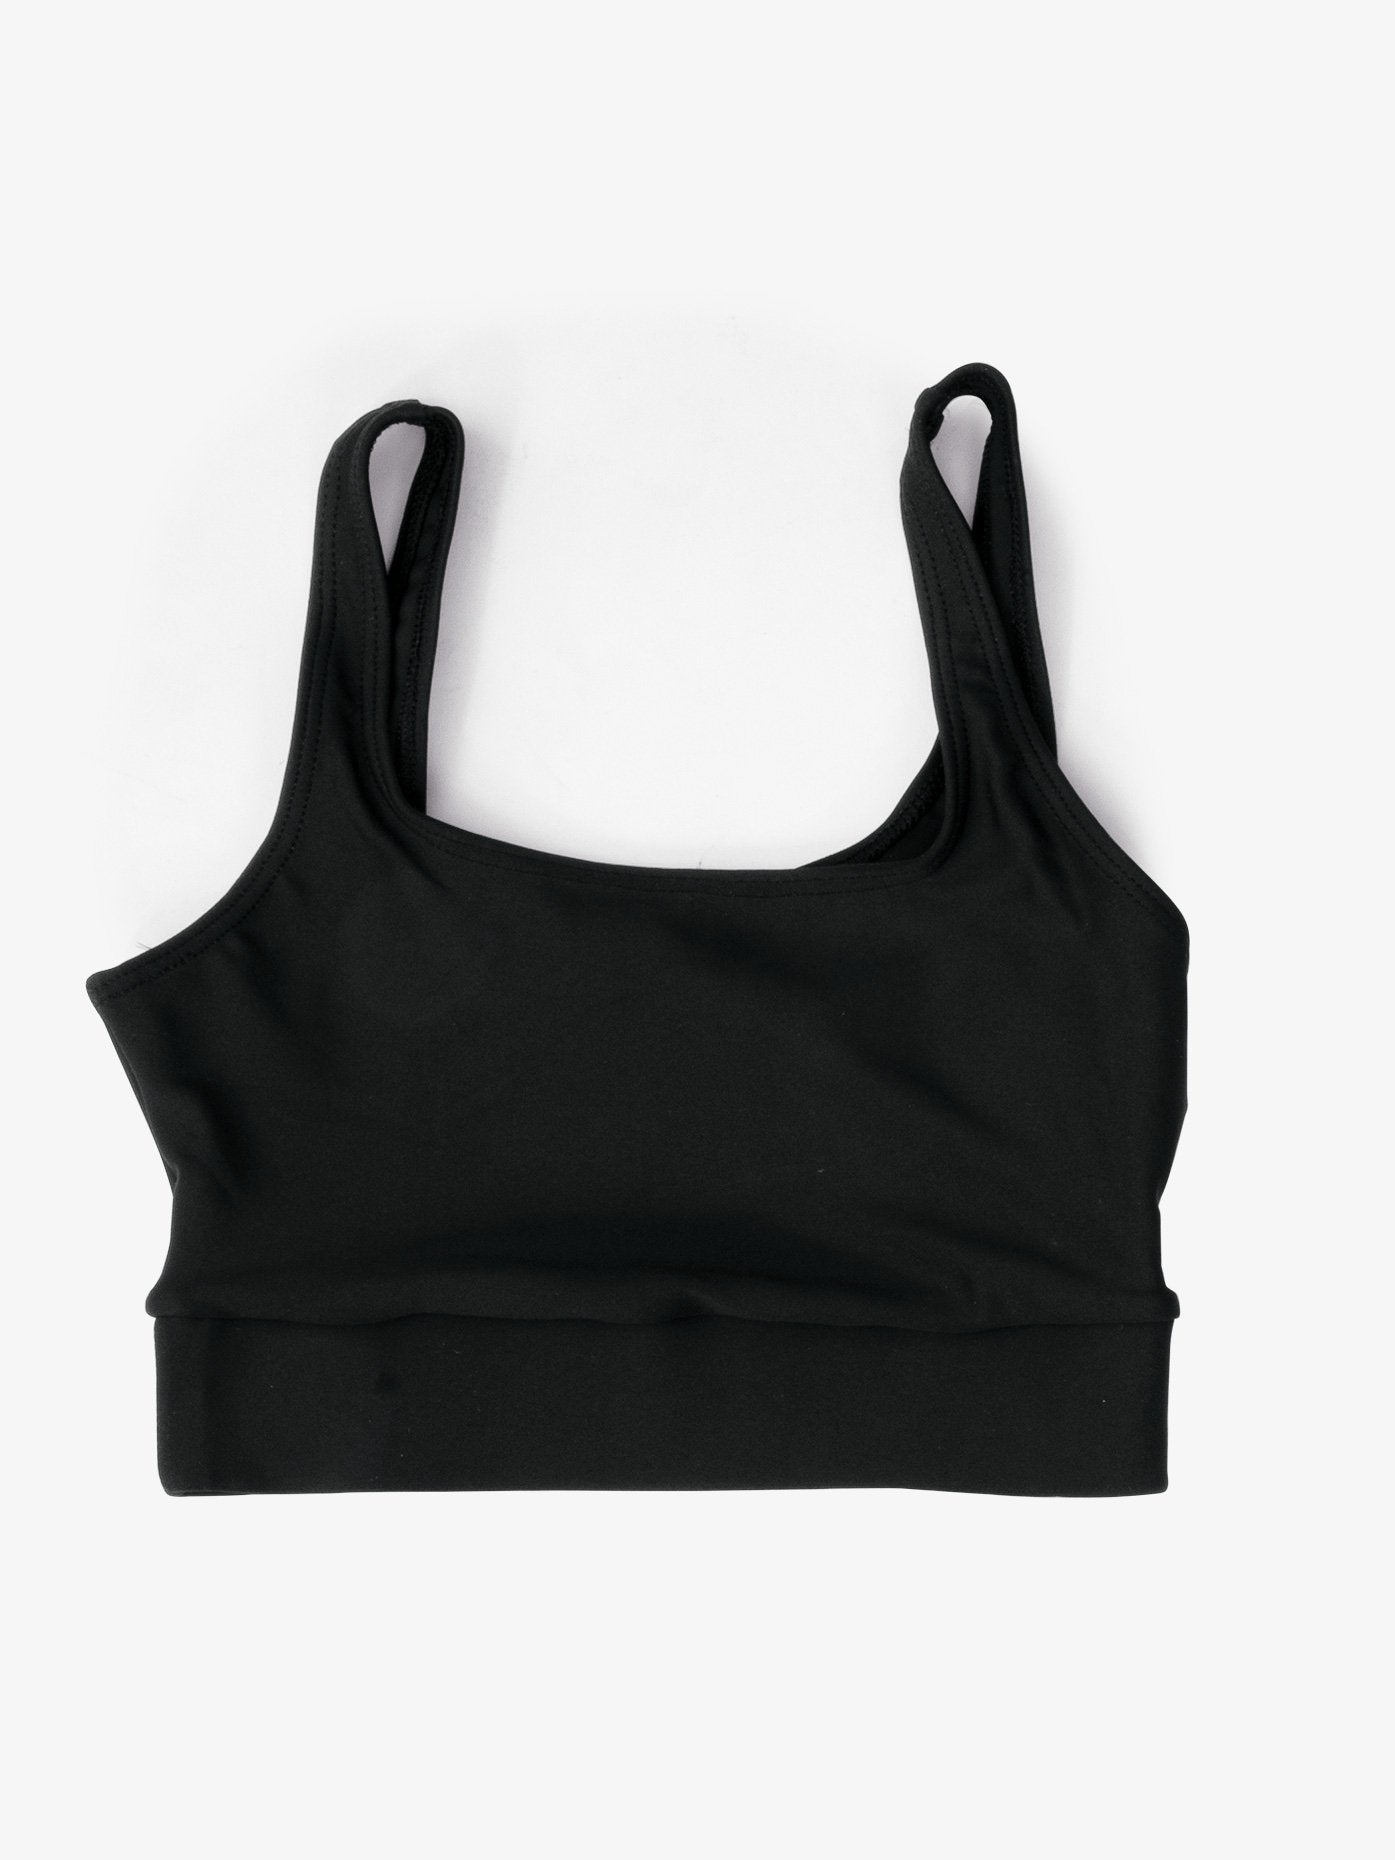 Girl's pinched back black bra top